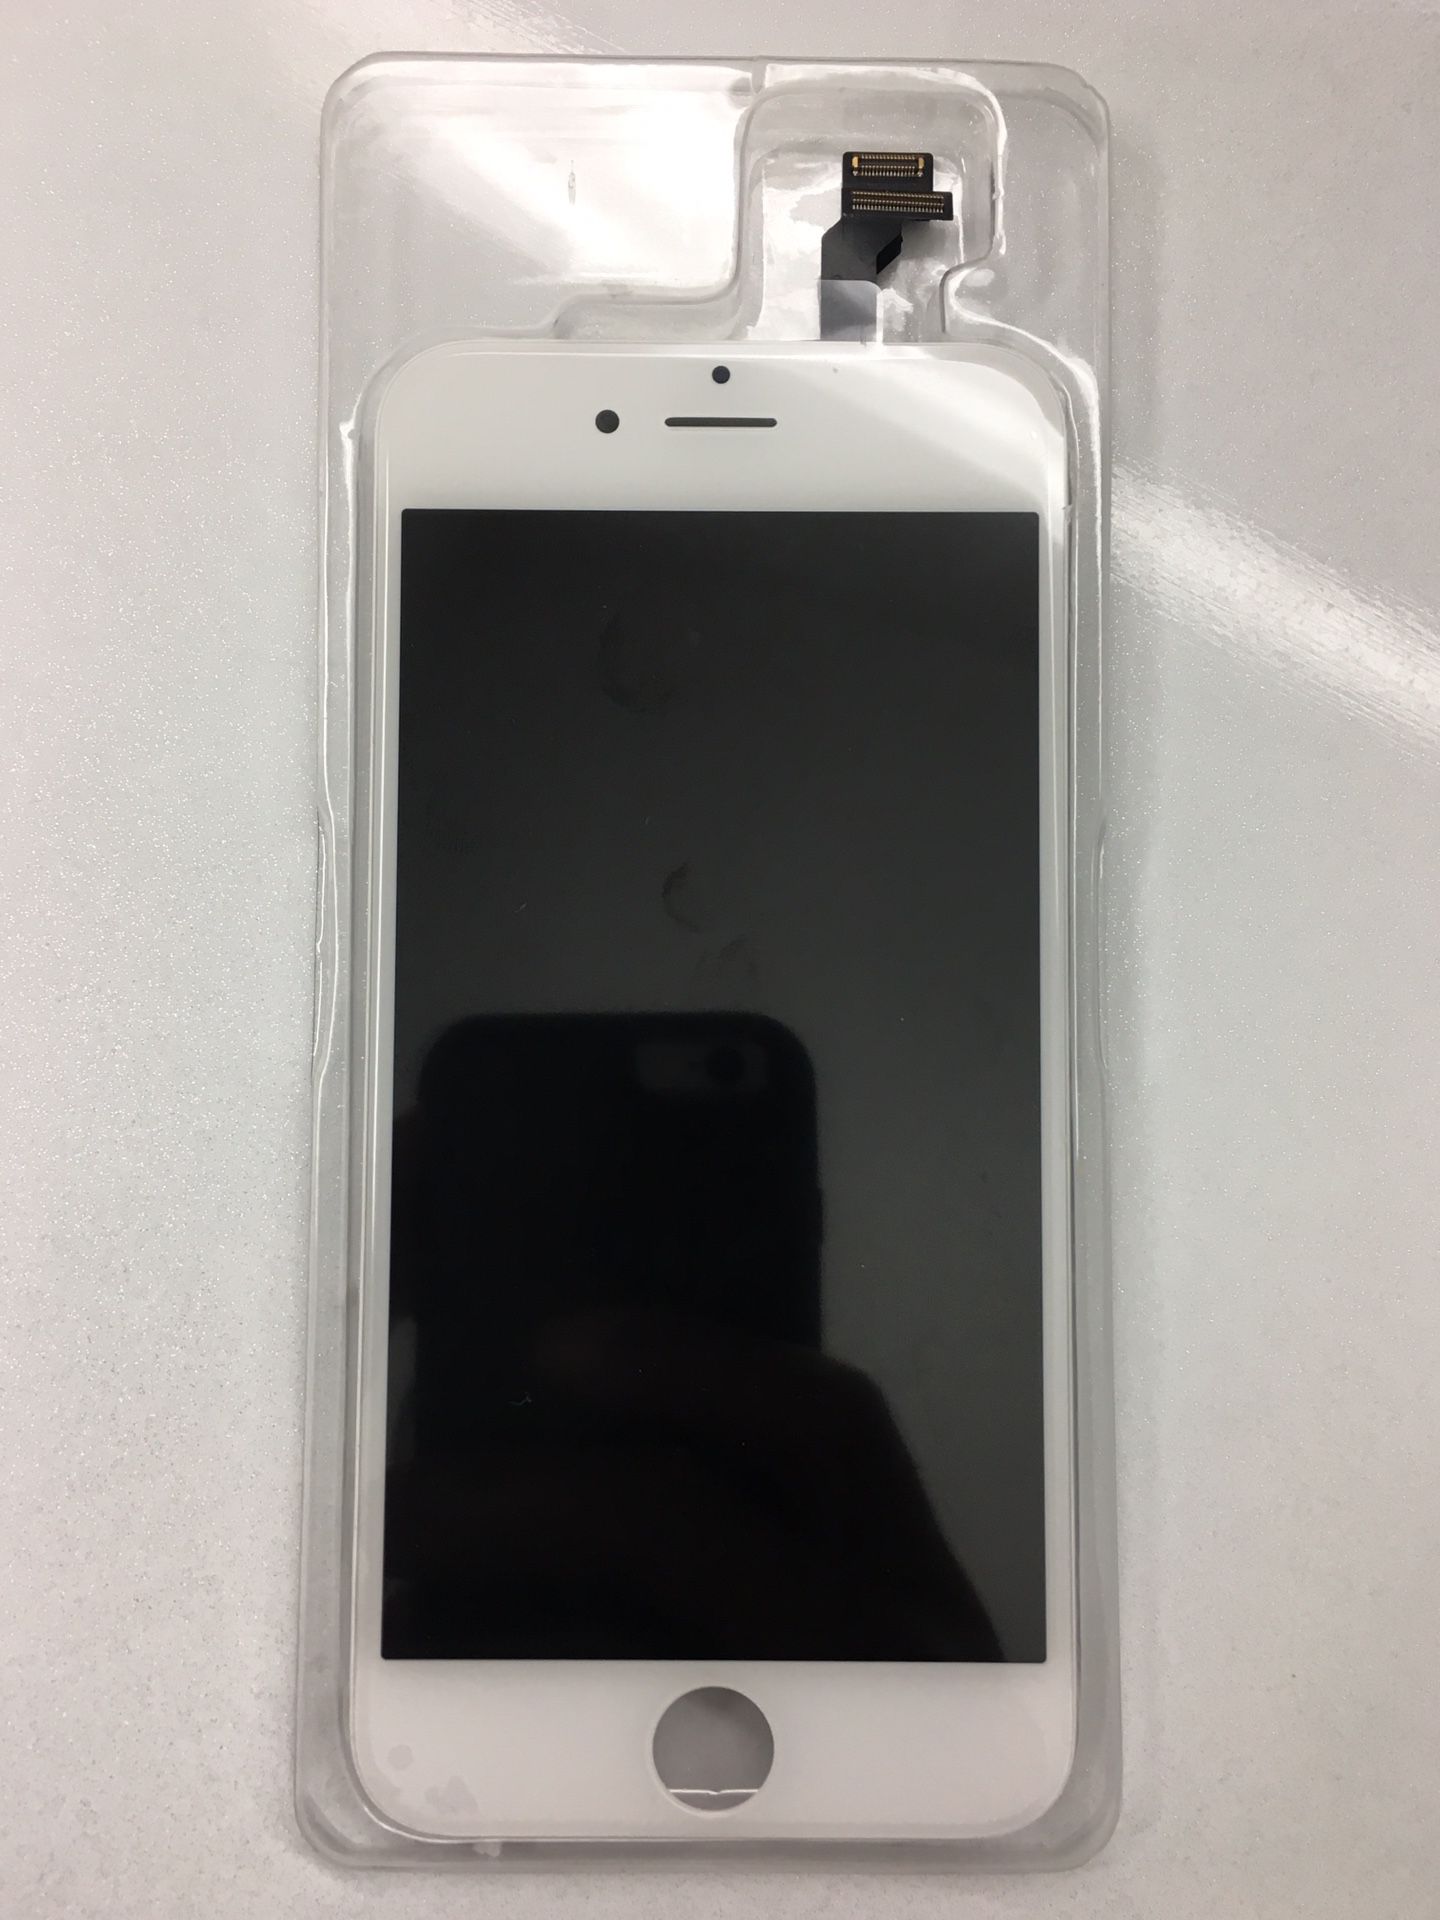 iPhone 6 LCD Digitizer Touch Screen Assembly Part - White